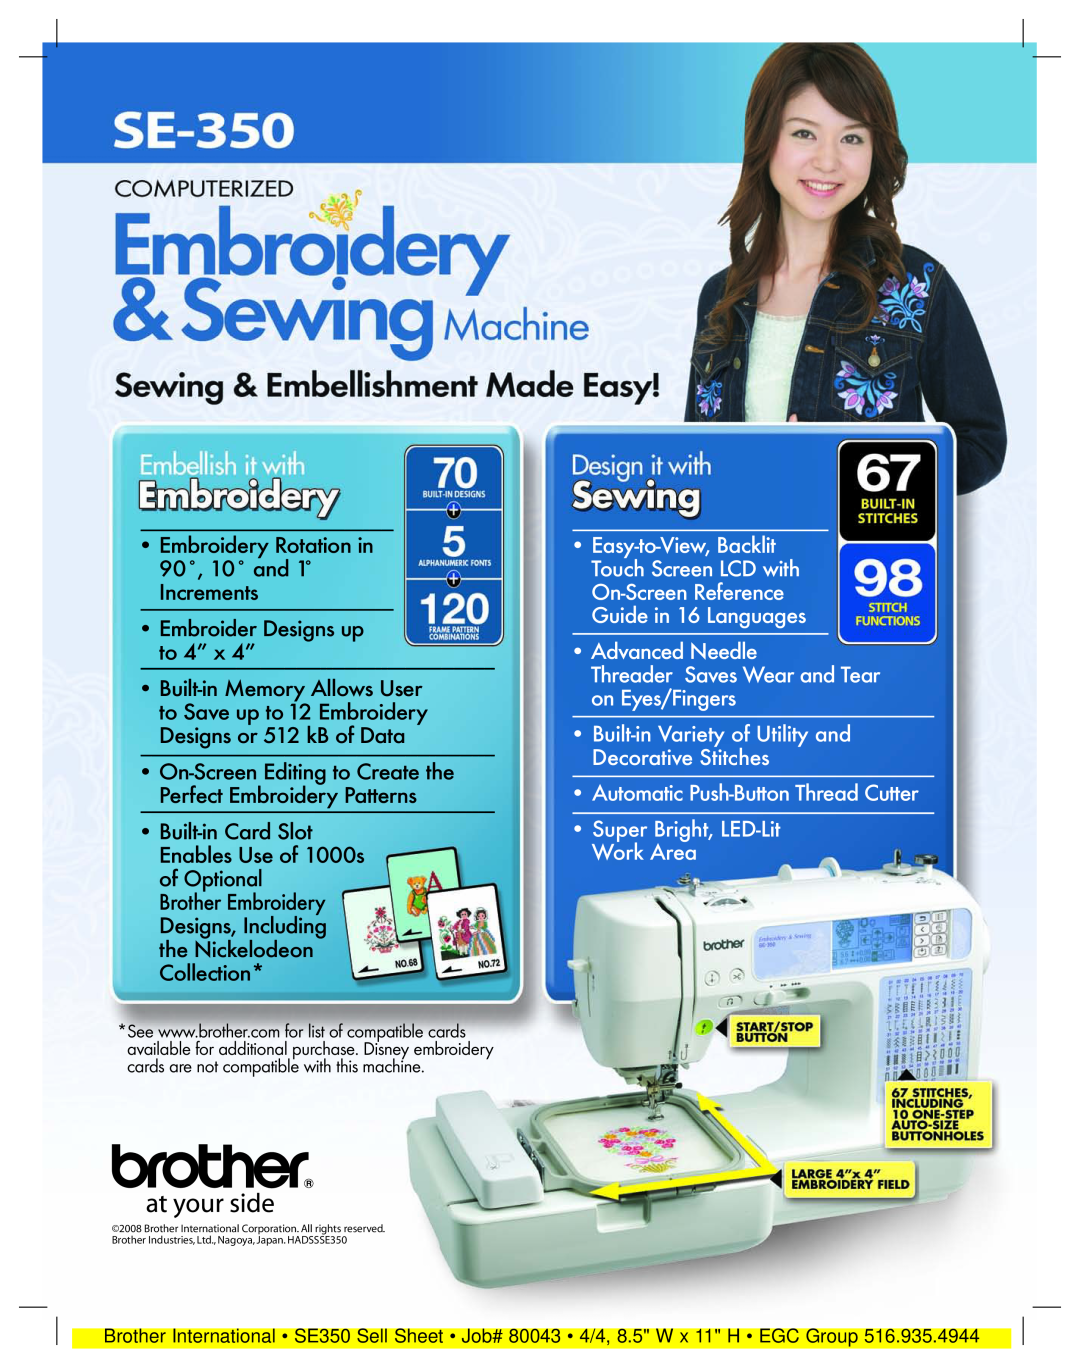 Brother SE-350 manual Embroidery Rotation in 90˚, 10˚ and 1˚ Increments, Embroider Designs up to 4” x 4” 